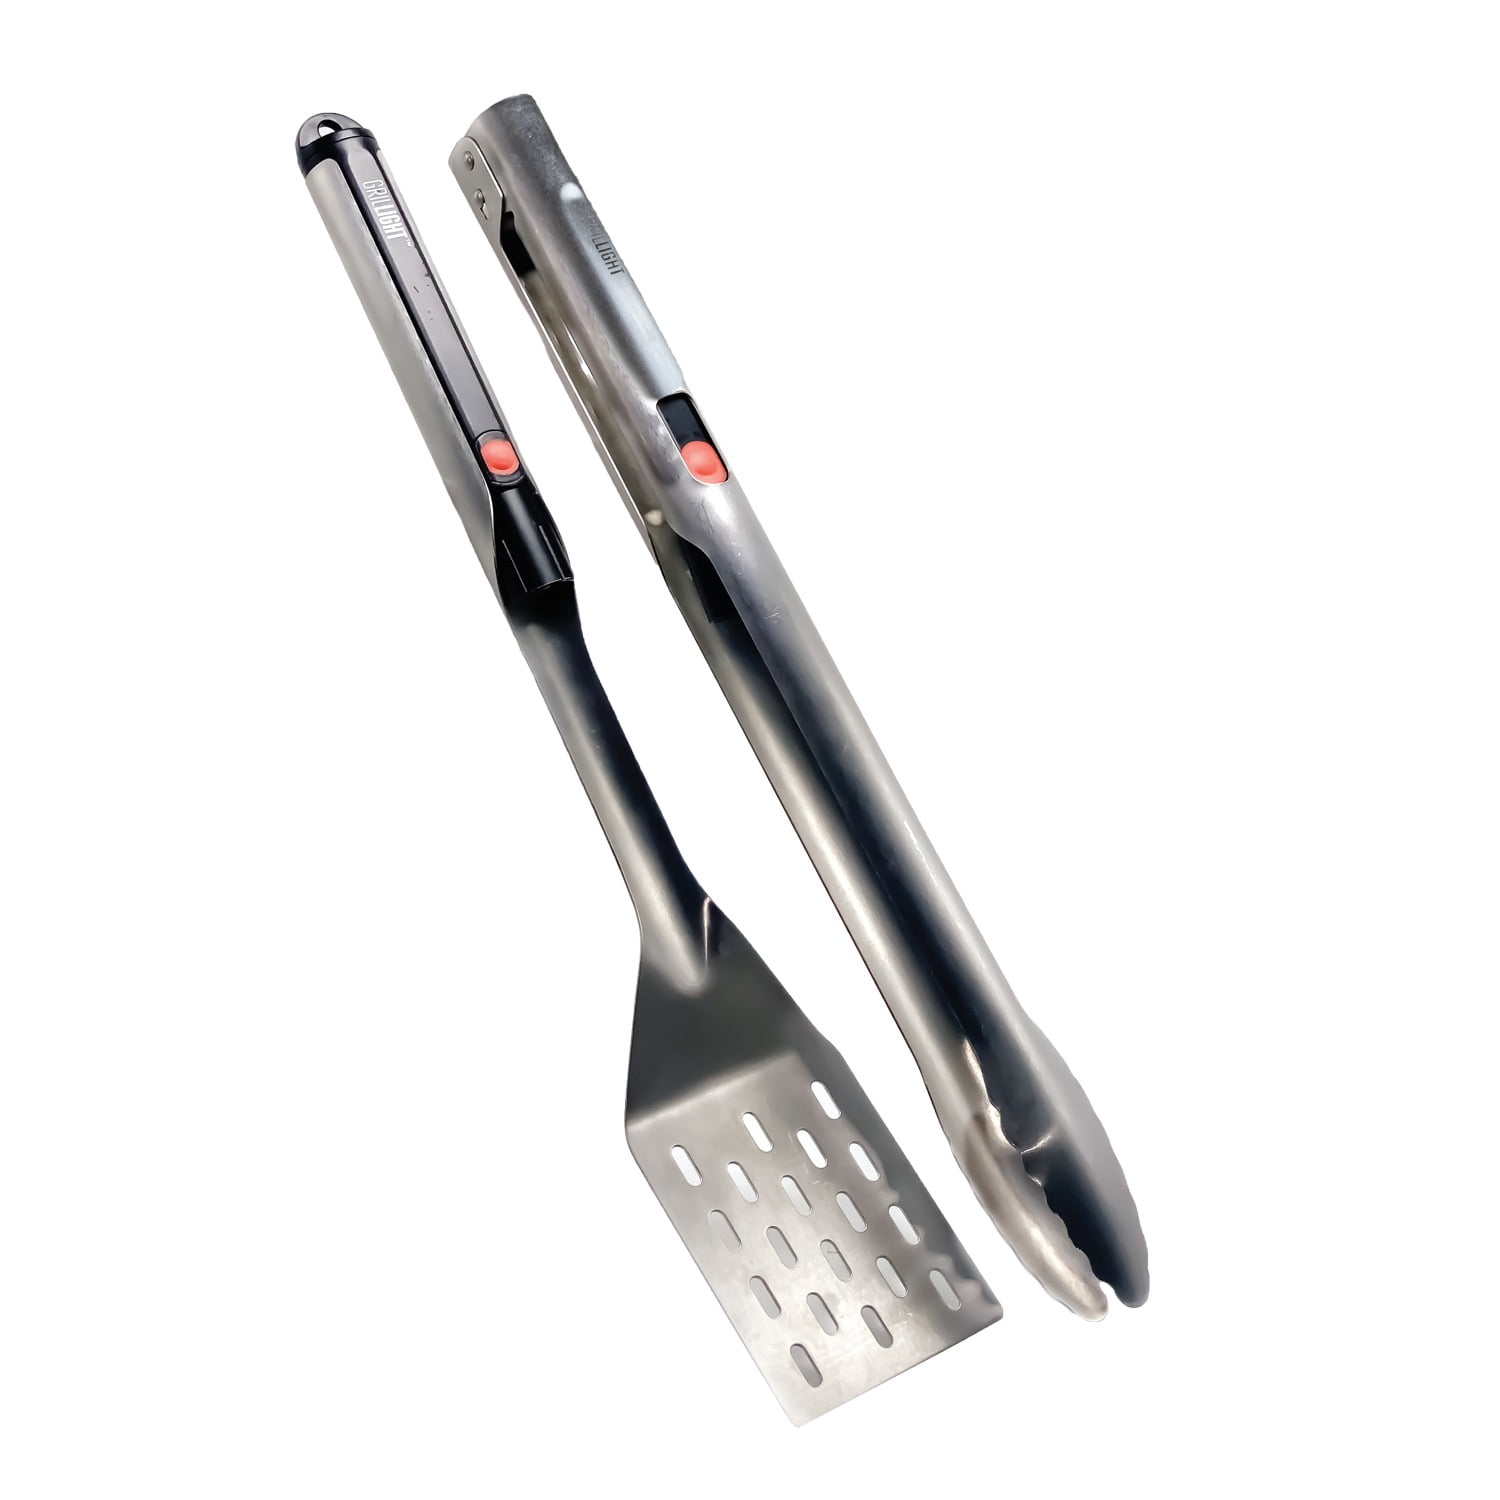 Grillight Stainless Steel LED Grilling Tongs Dishwasher Safe 